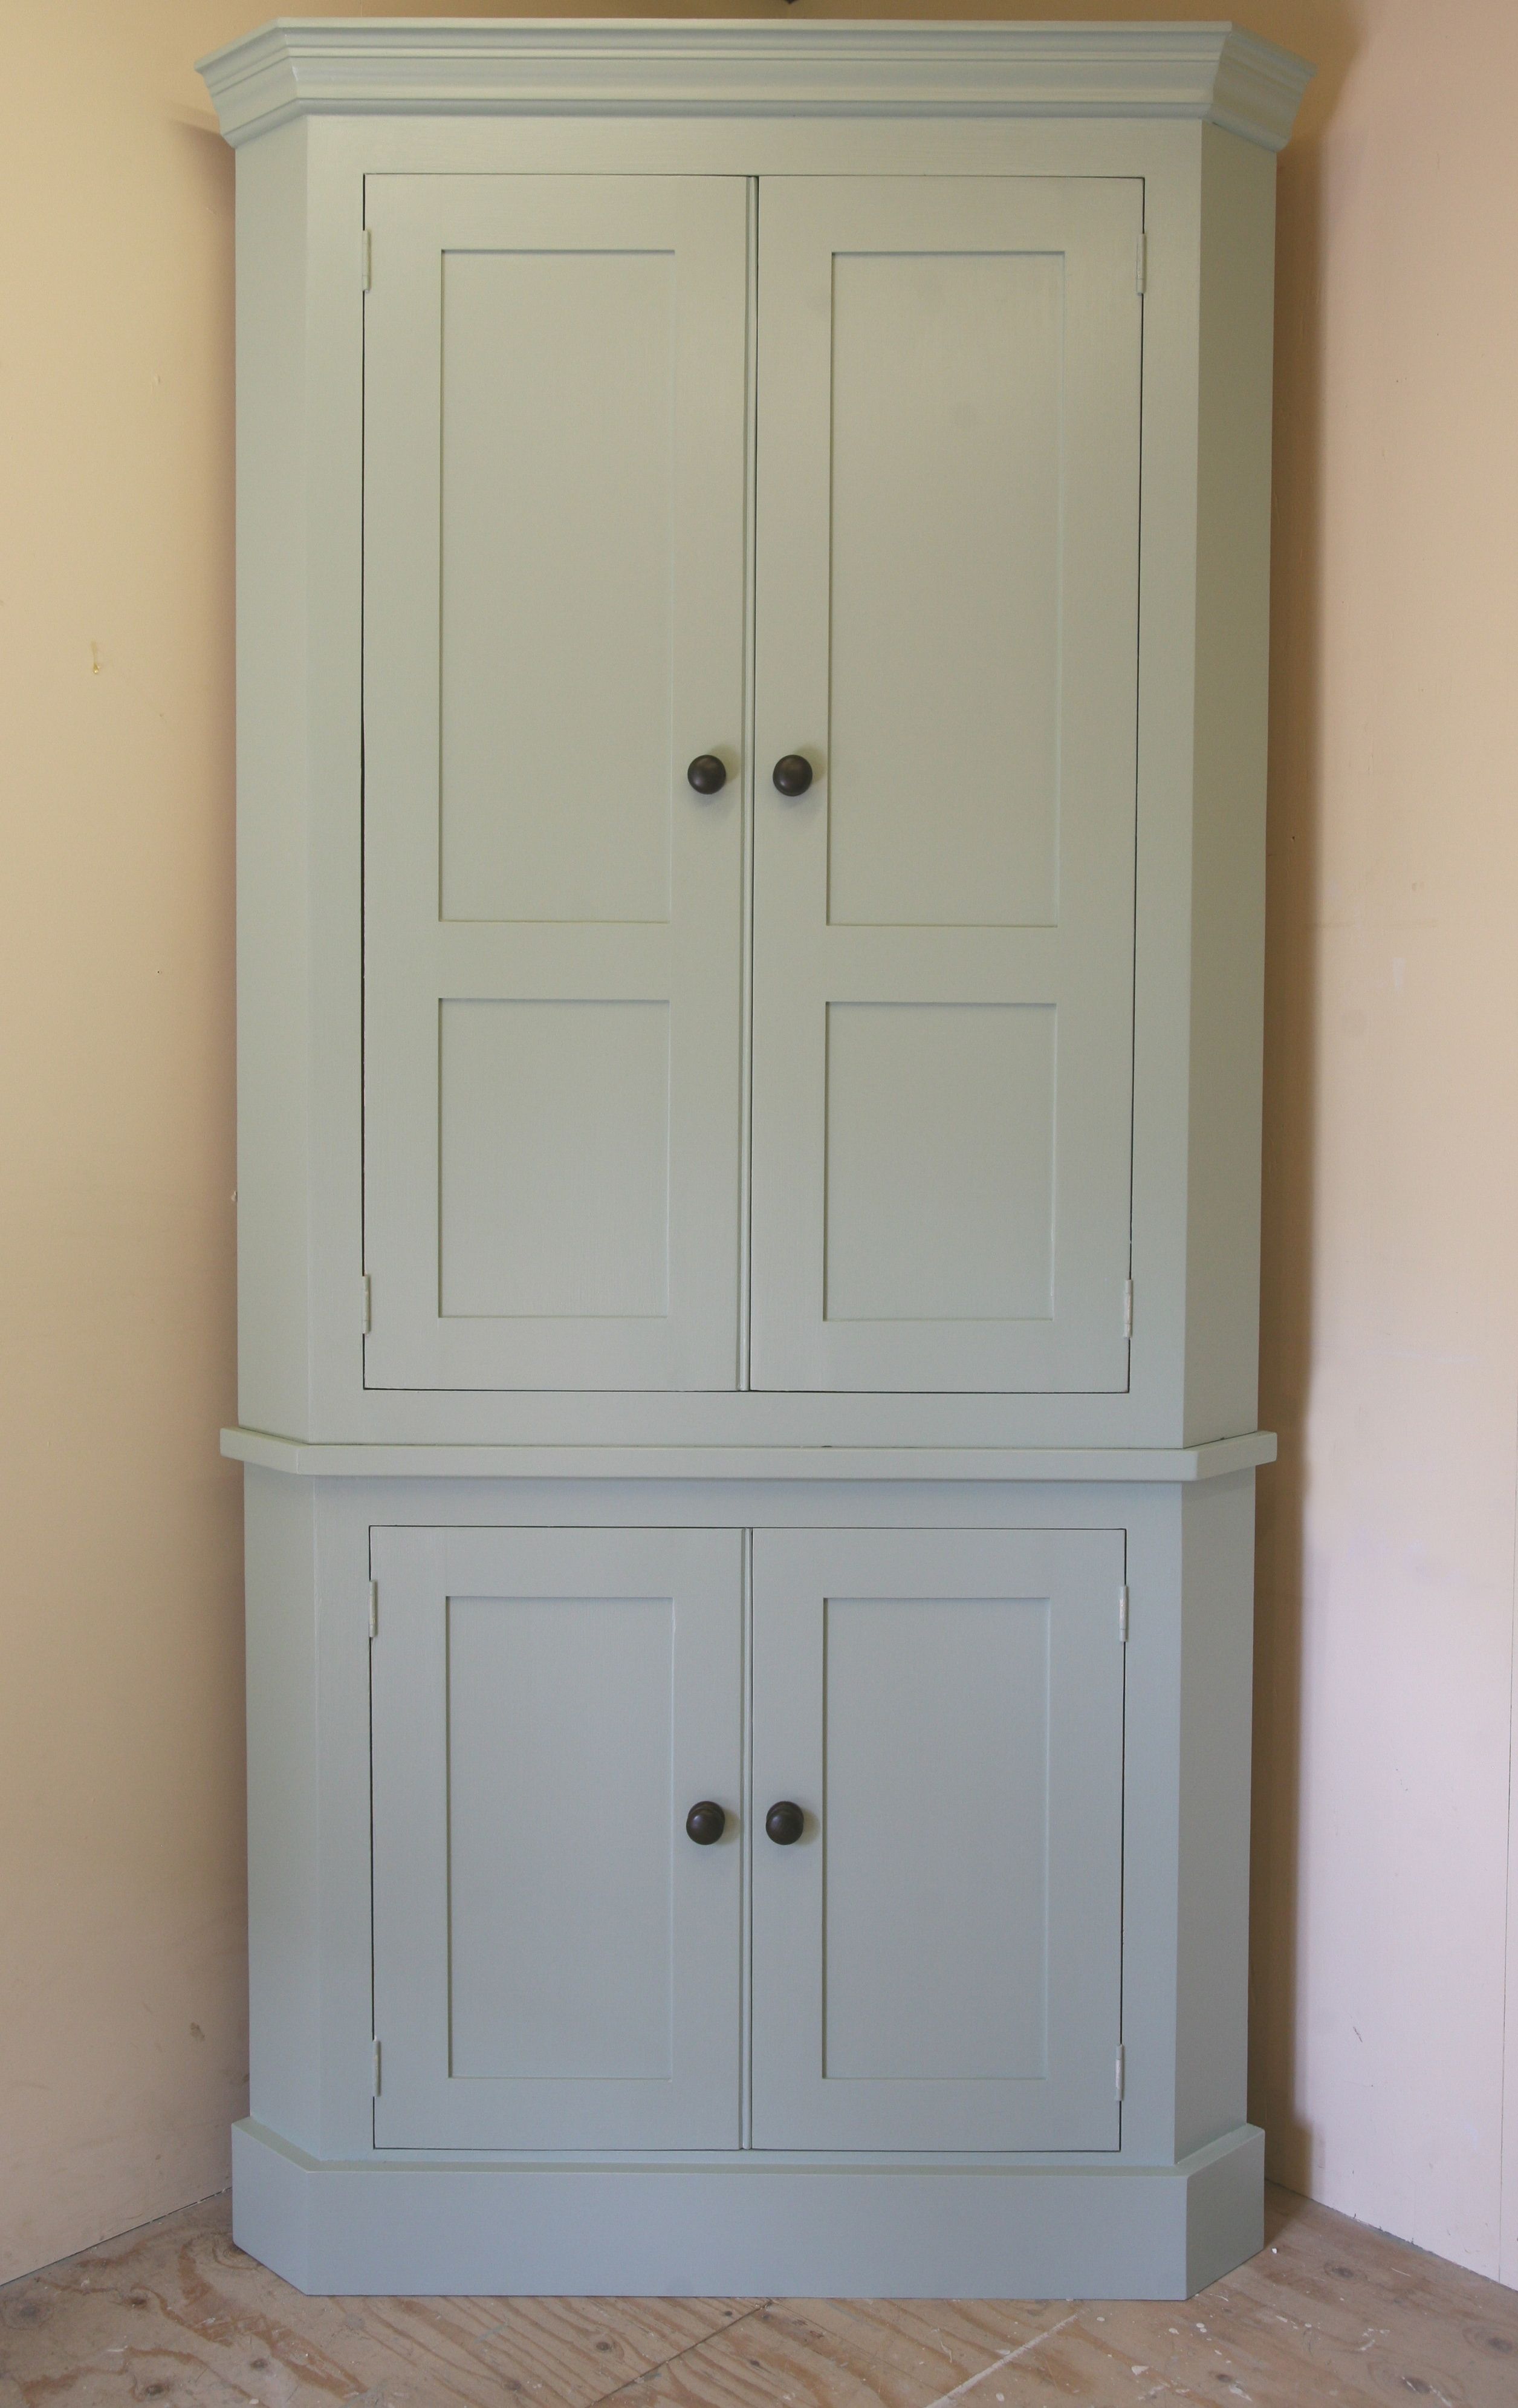 2018 Complete Your Corner With Our Tall Larder Corner Cupboard (View 9 of 15)